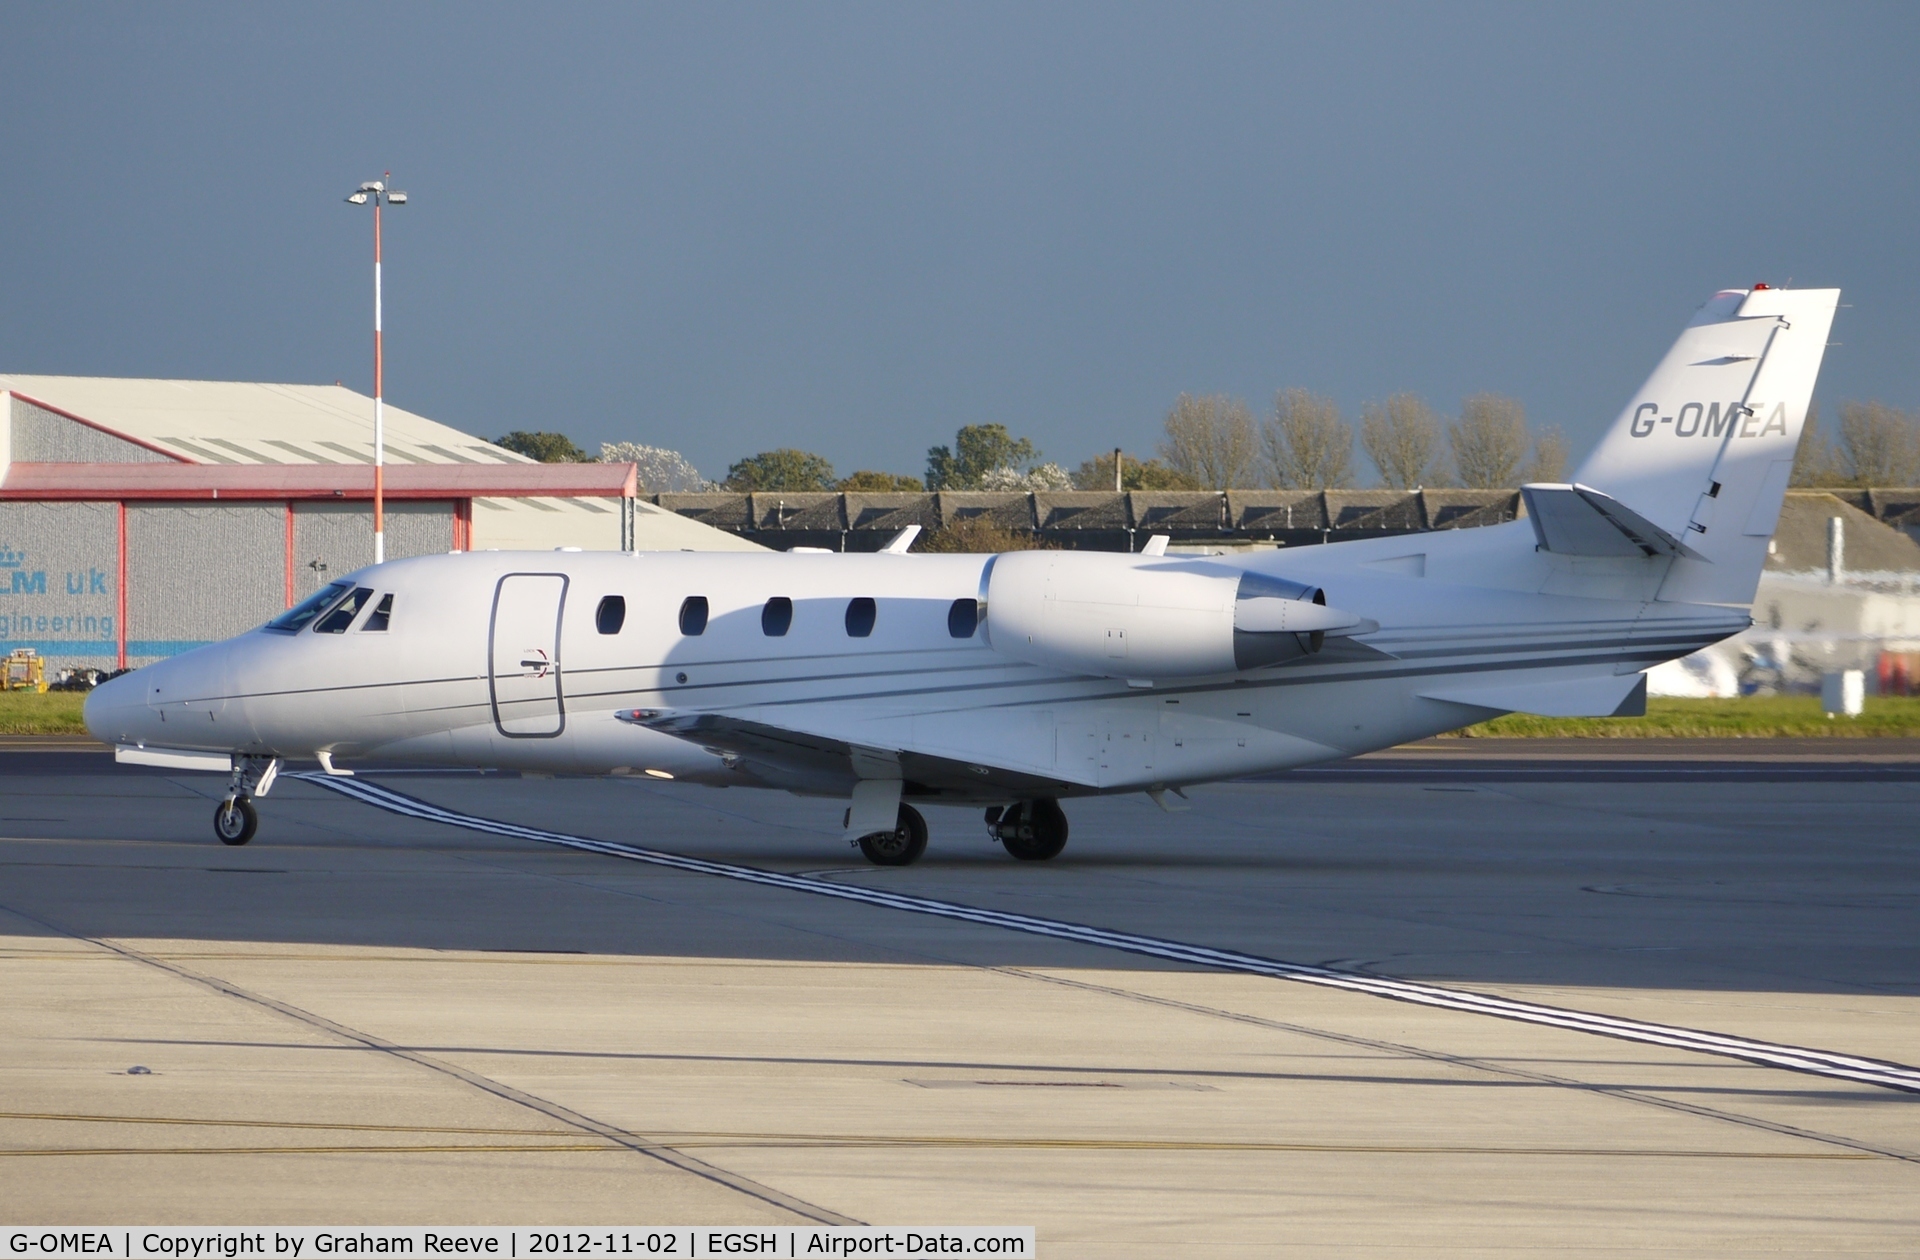 G-OMEA, 2006 Cessna 560XL Citation XLS C/N 560-5610, About to depart.